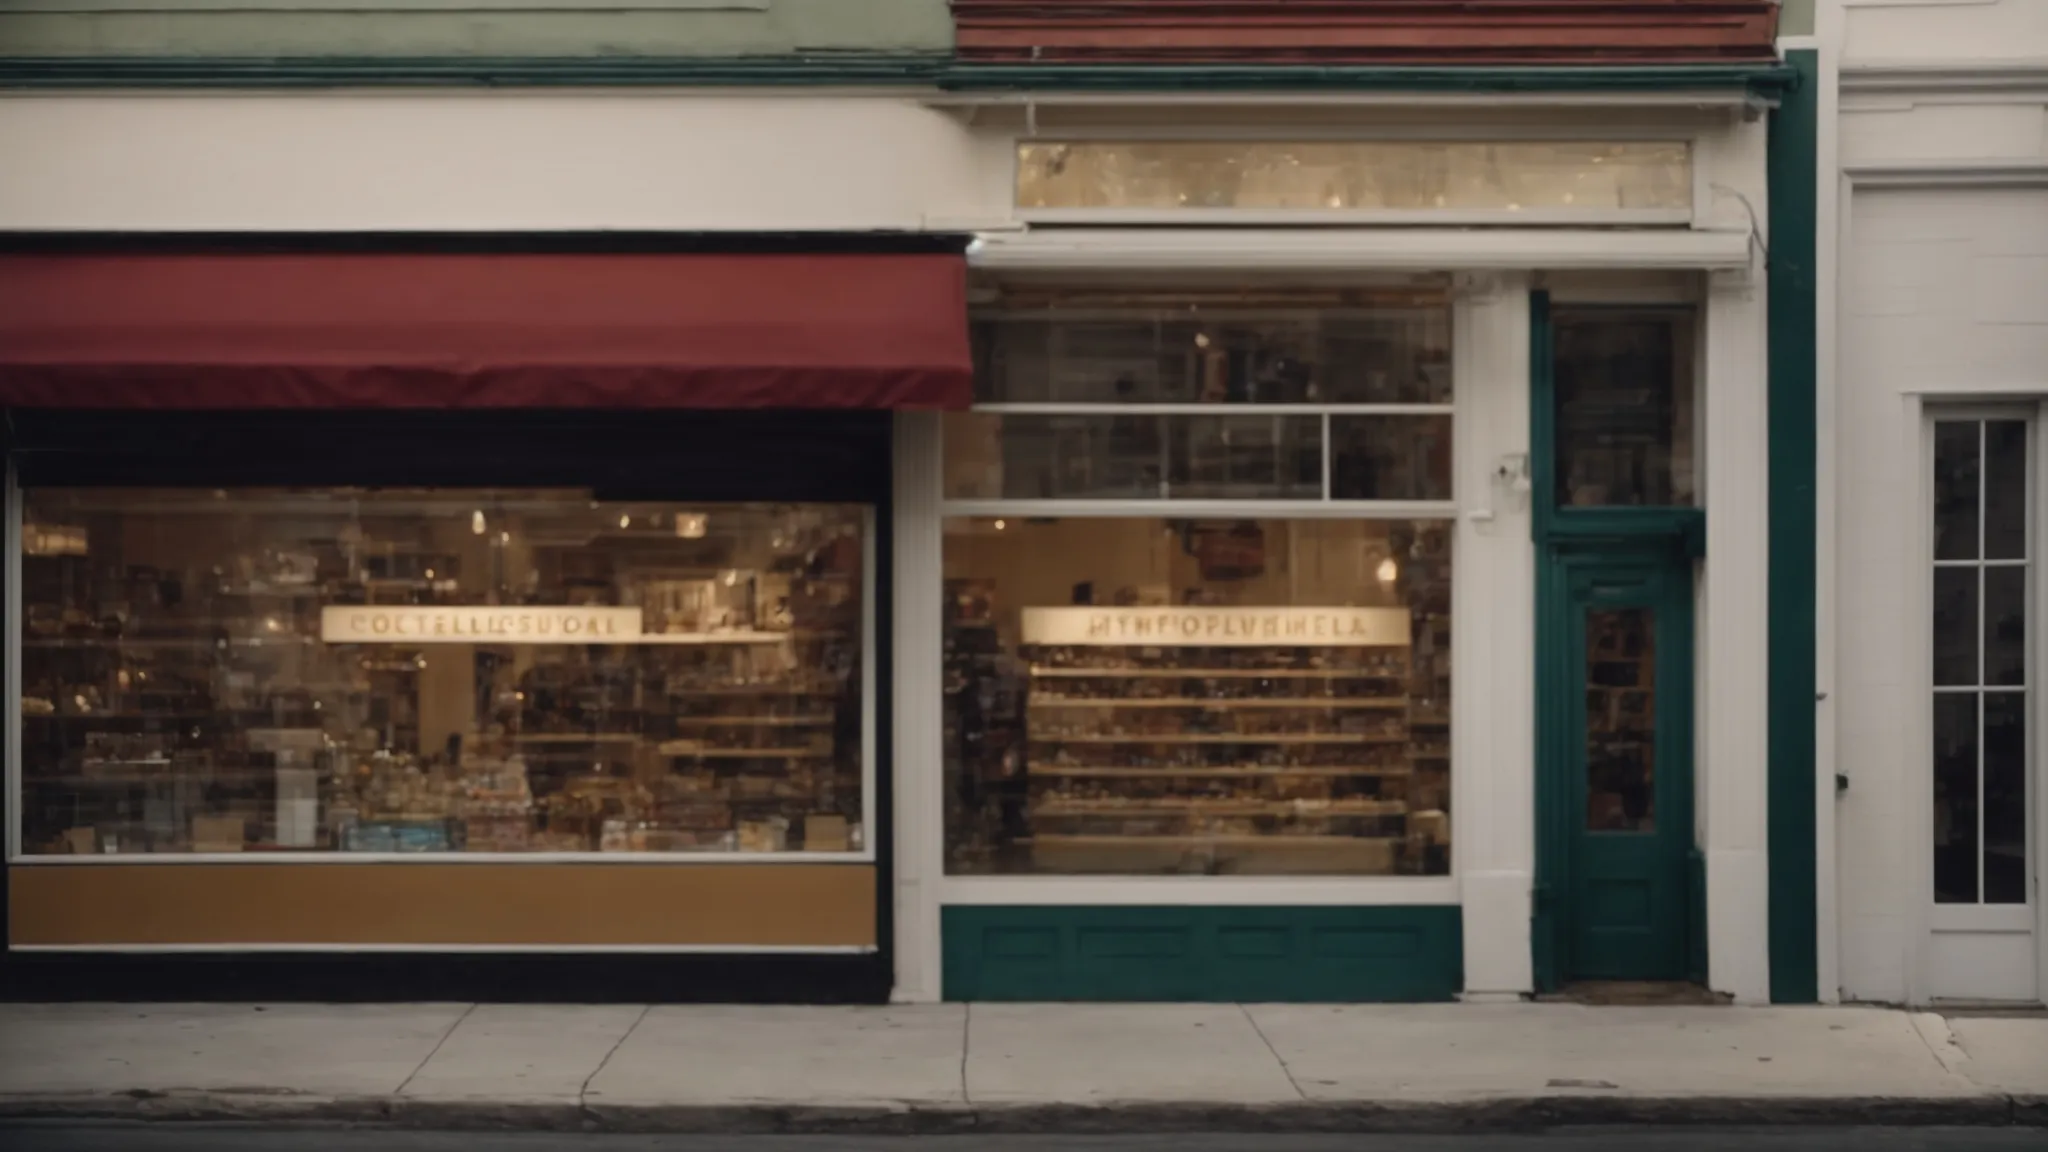 a timeline showcasing the transformation of store fronts from small historic shops to modern retail chains.